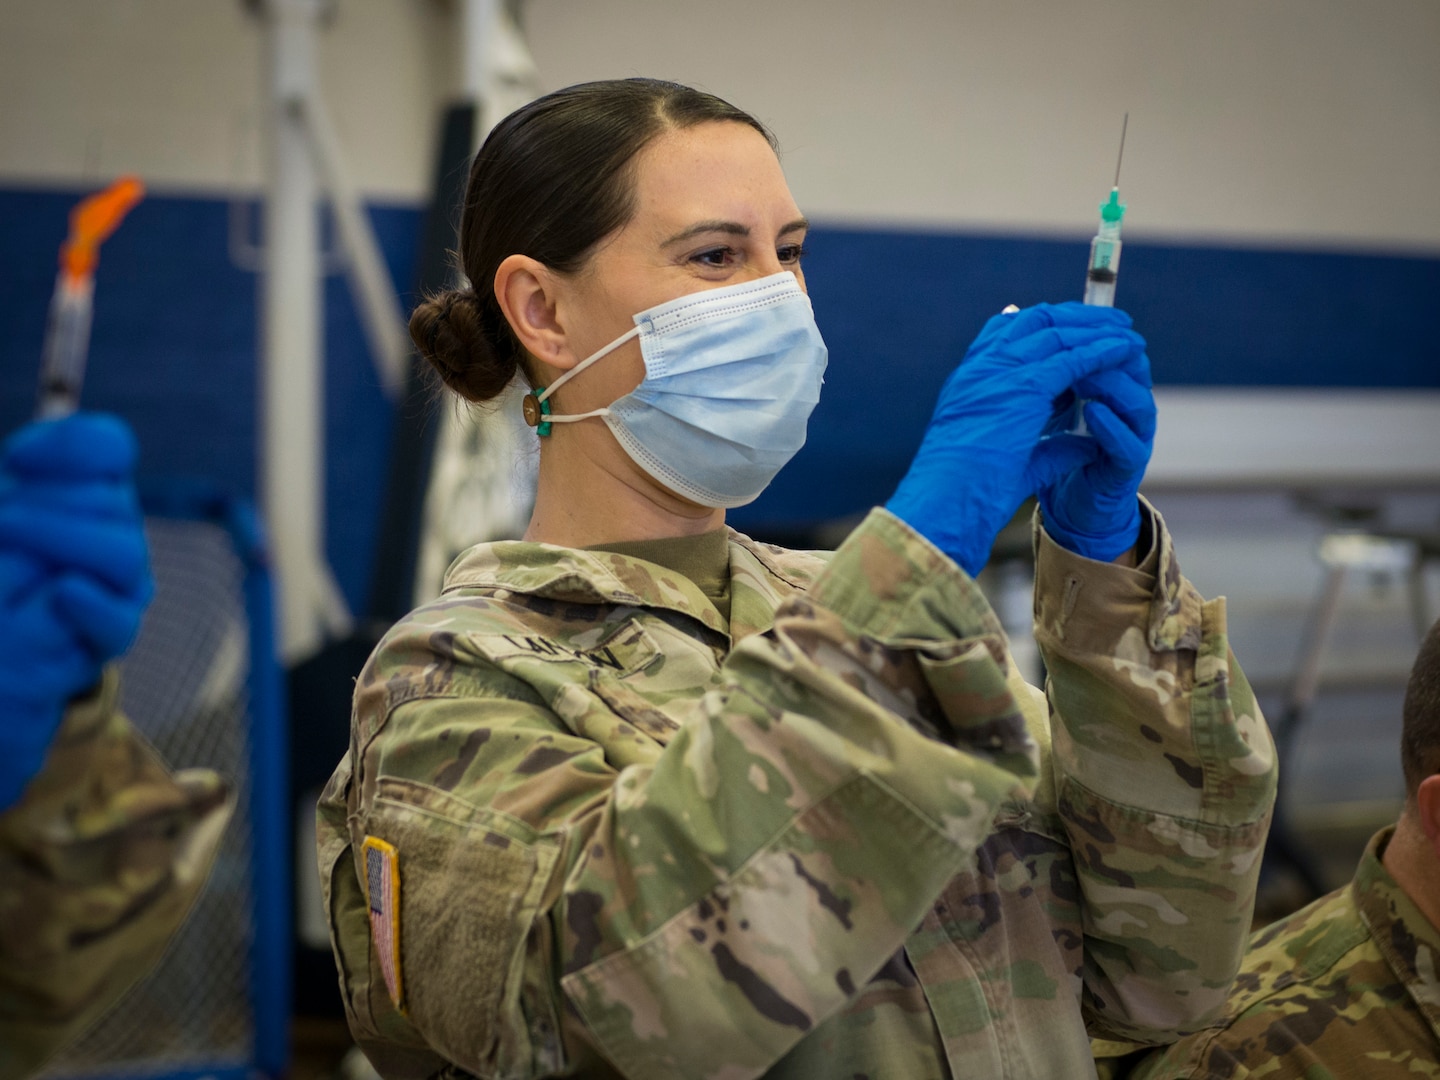 Sgt. 1st Class Sara Landon, Connecticut Army National Guard Medical Detachment readiness noncommissioned officer, prepares vials of Pfizer COVID-19 vaccine during a vaccination clinic at Naval Submarine Base New London in Groton, Connecticut, April 1, 2021. The Connecticut National Guard partnered with the base to distribute vaccines to approximately 1,000 Sailors and eligible Navy personnel.